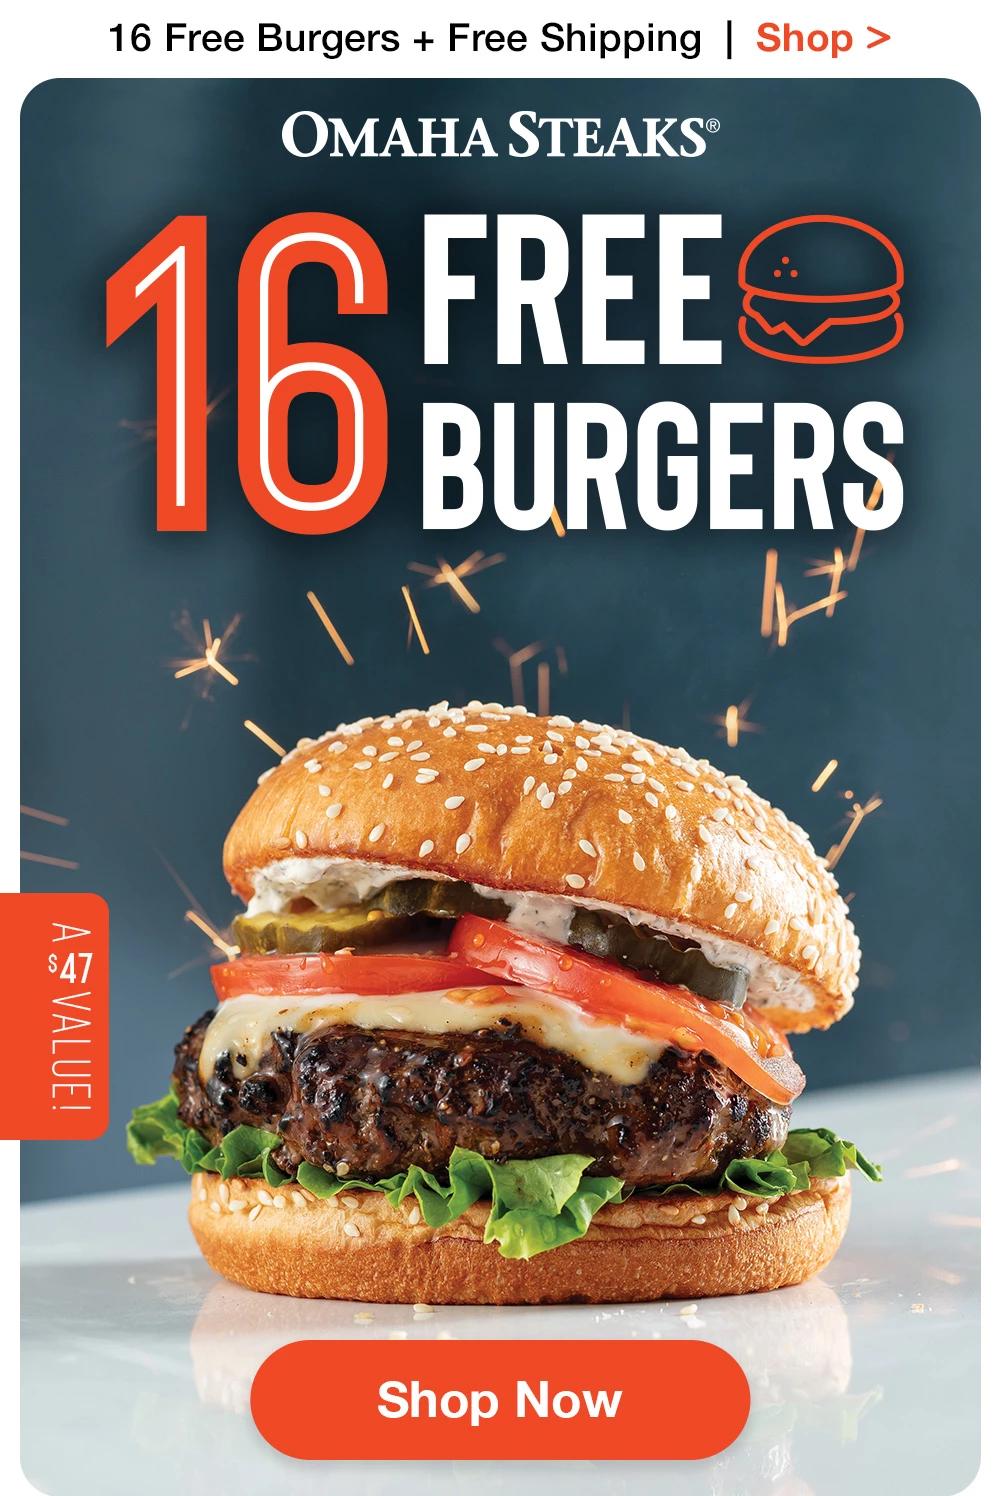 16 Free Burgers + Free Shipping | Shop >  OMAHA STEAKS® | 16 FREE BURGERS - A $47 VALUE! || Shop Now